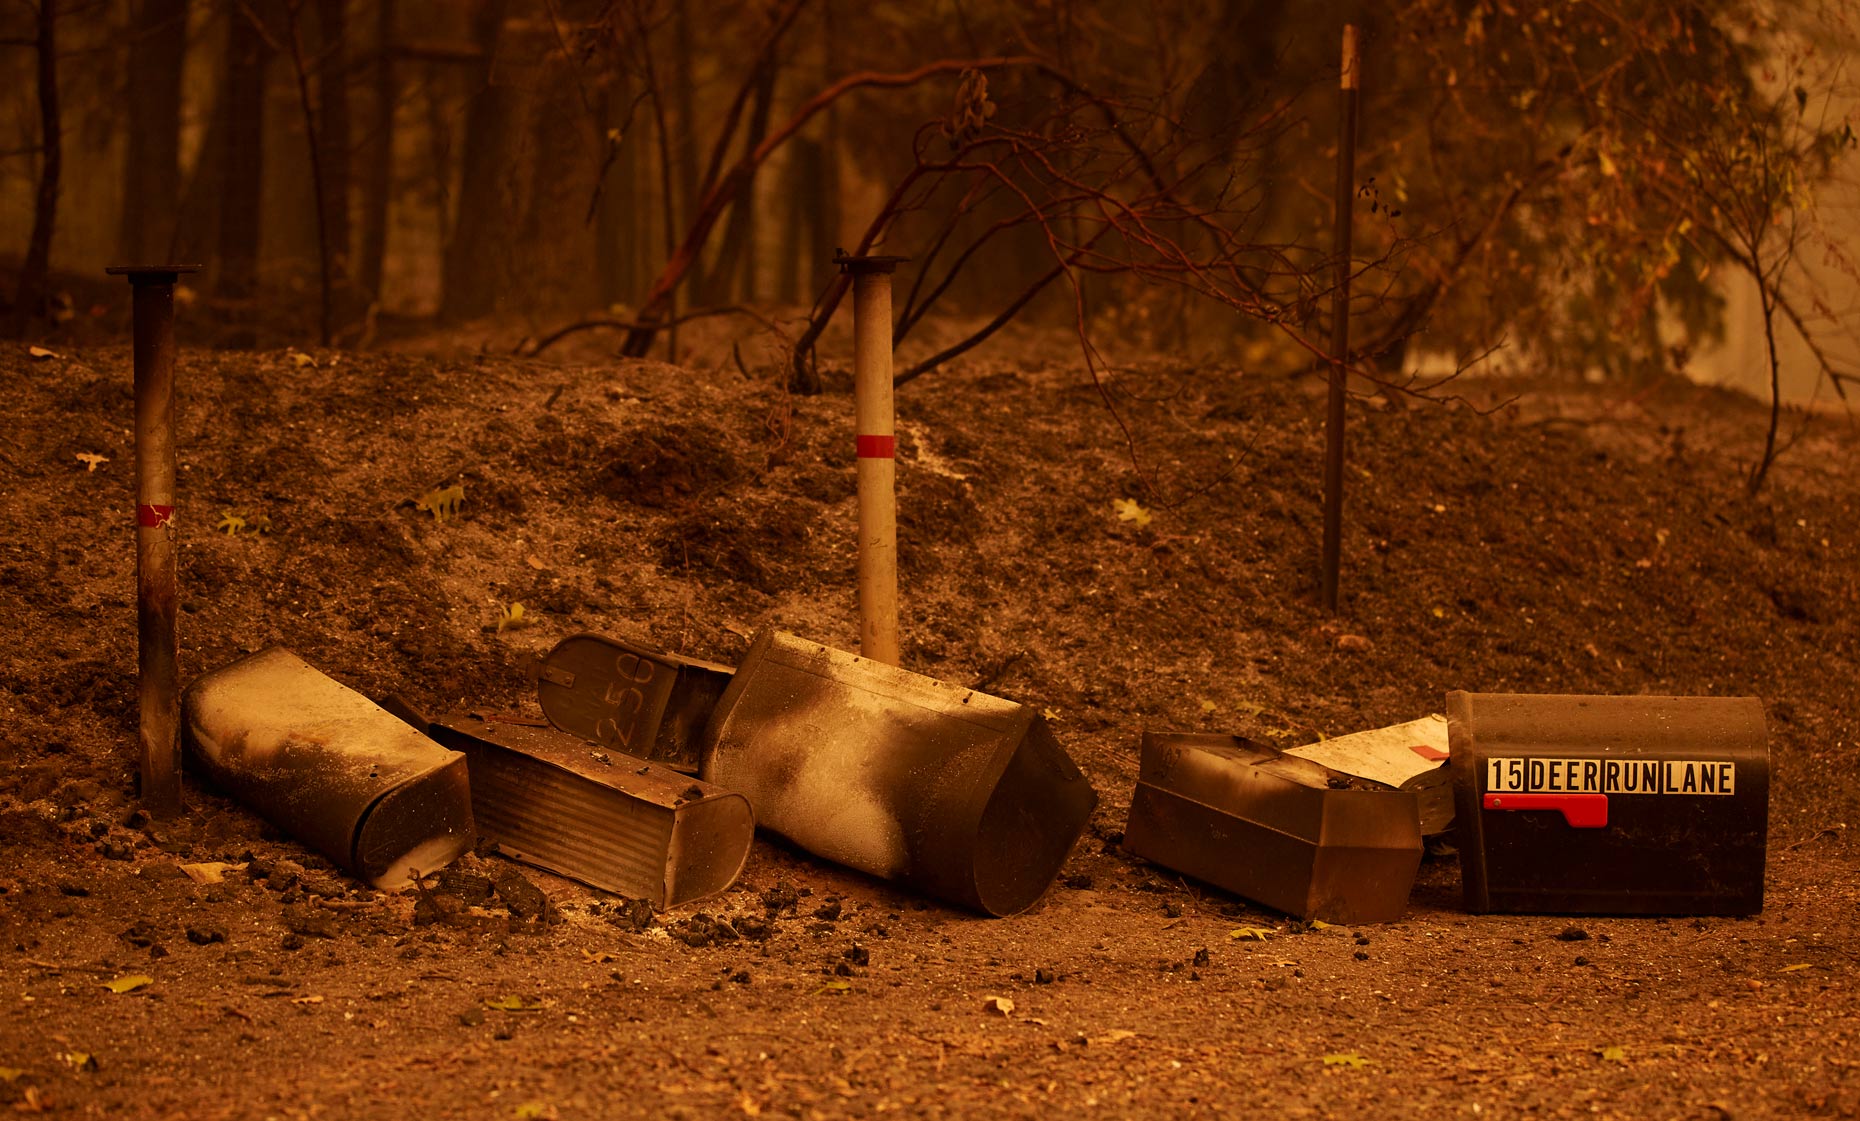 Burned Mailboxes in Wildfire